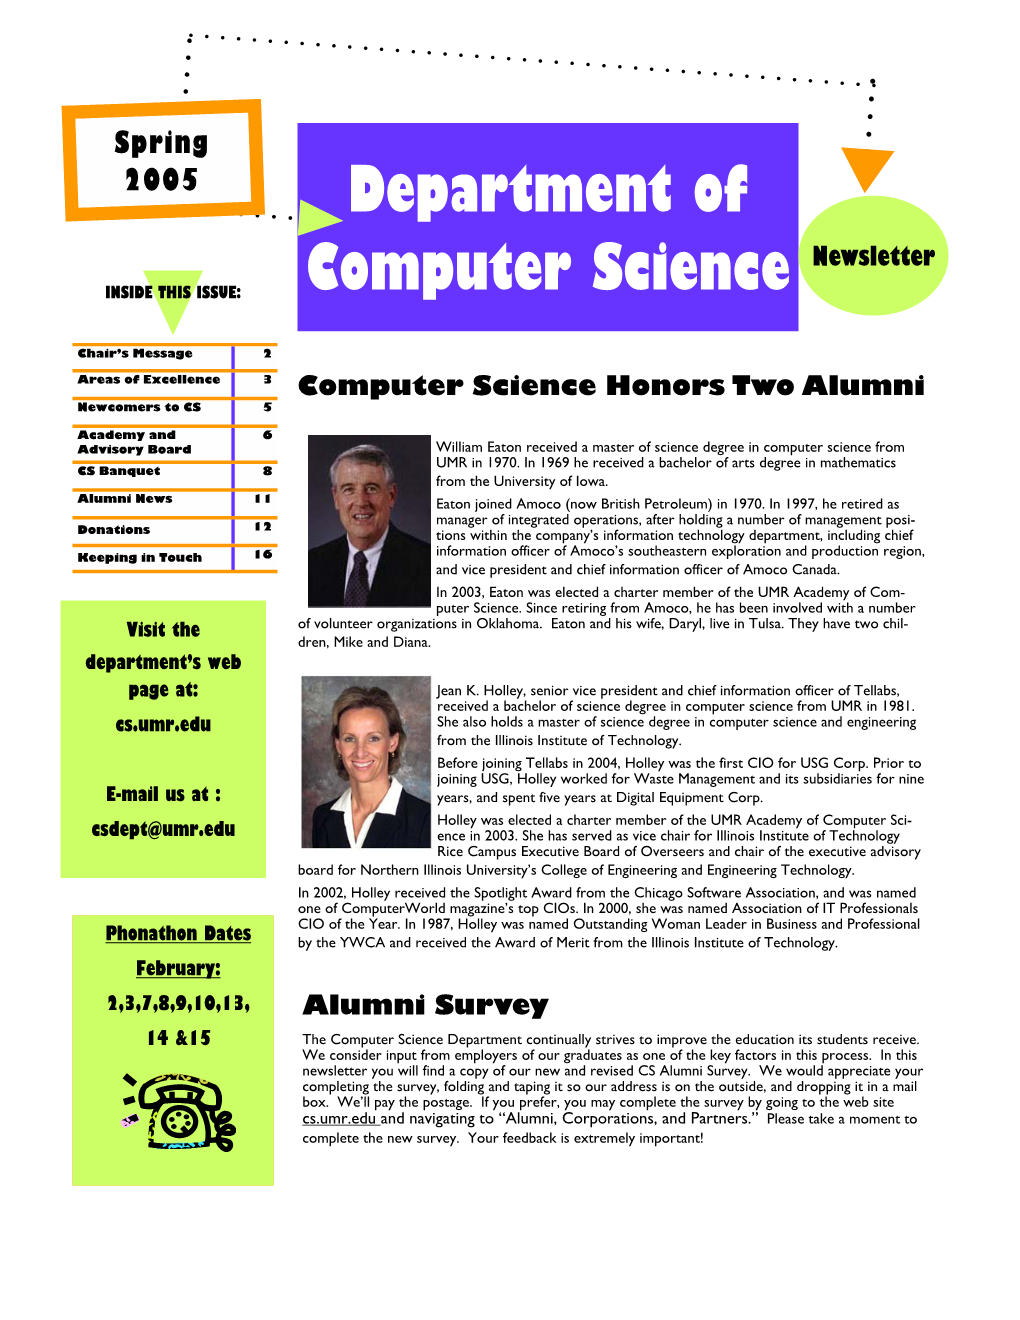 DEPARTMENT of COMPUTER SCIENCE NEWSLETTER Page 3